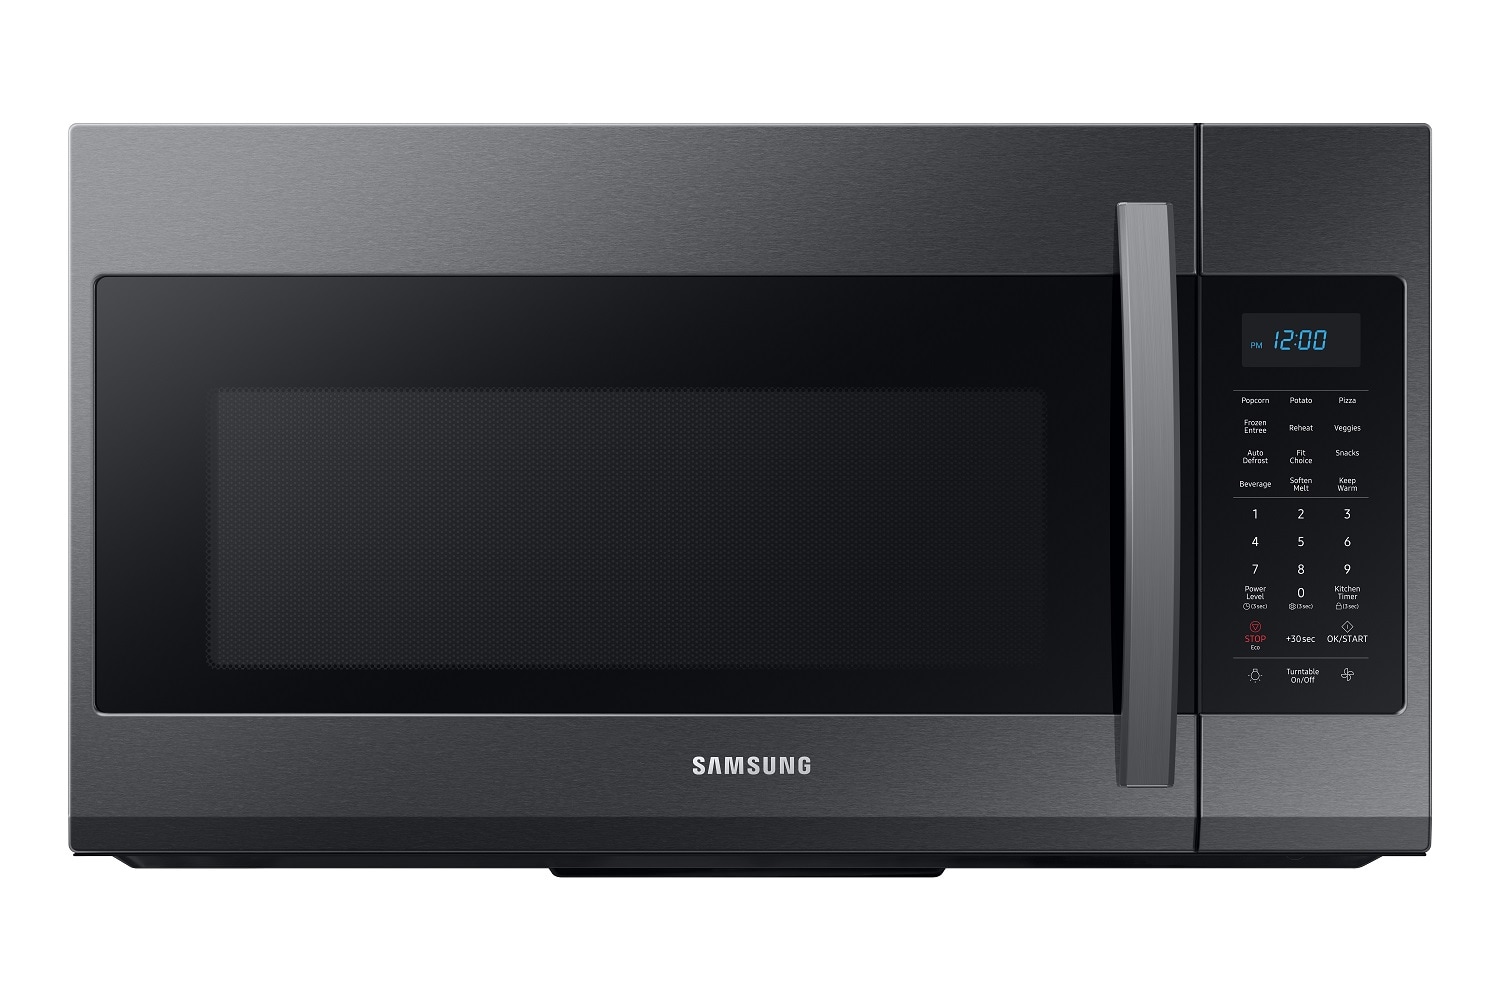 Samsung 1.1 Cu. Ft. Over-the-Range Microwave in Stainless Steel